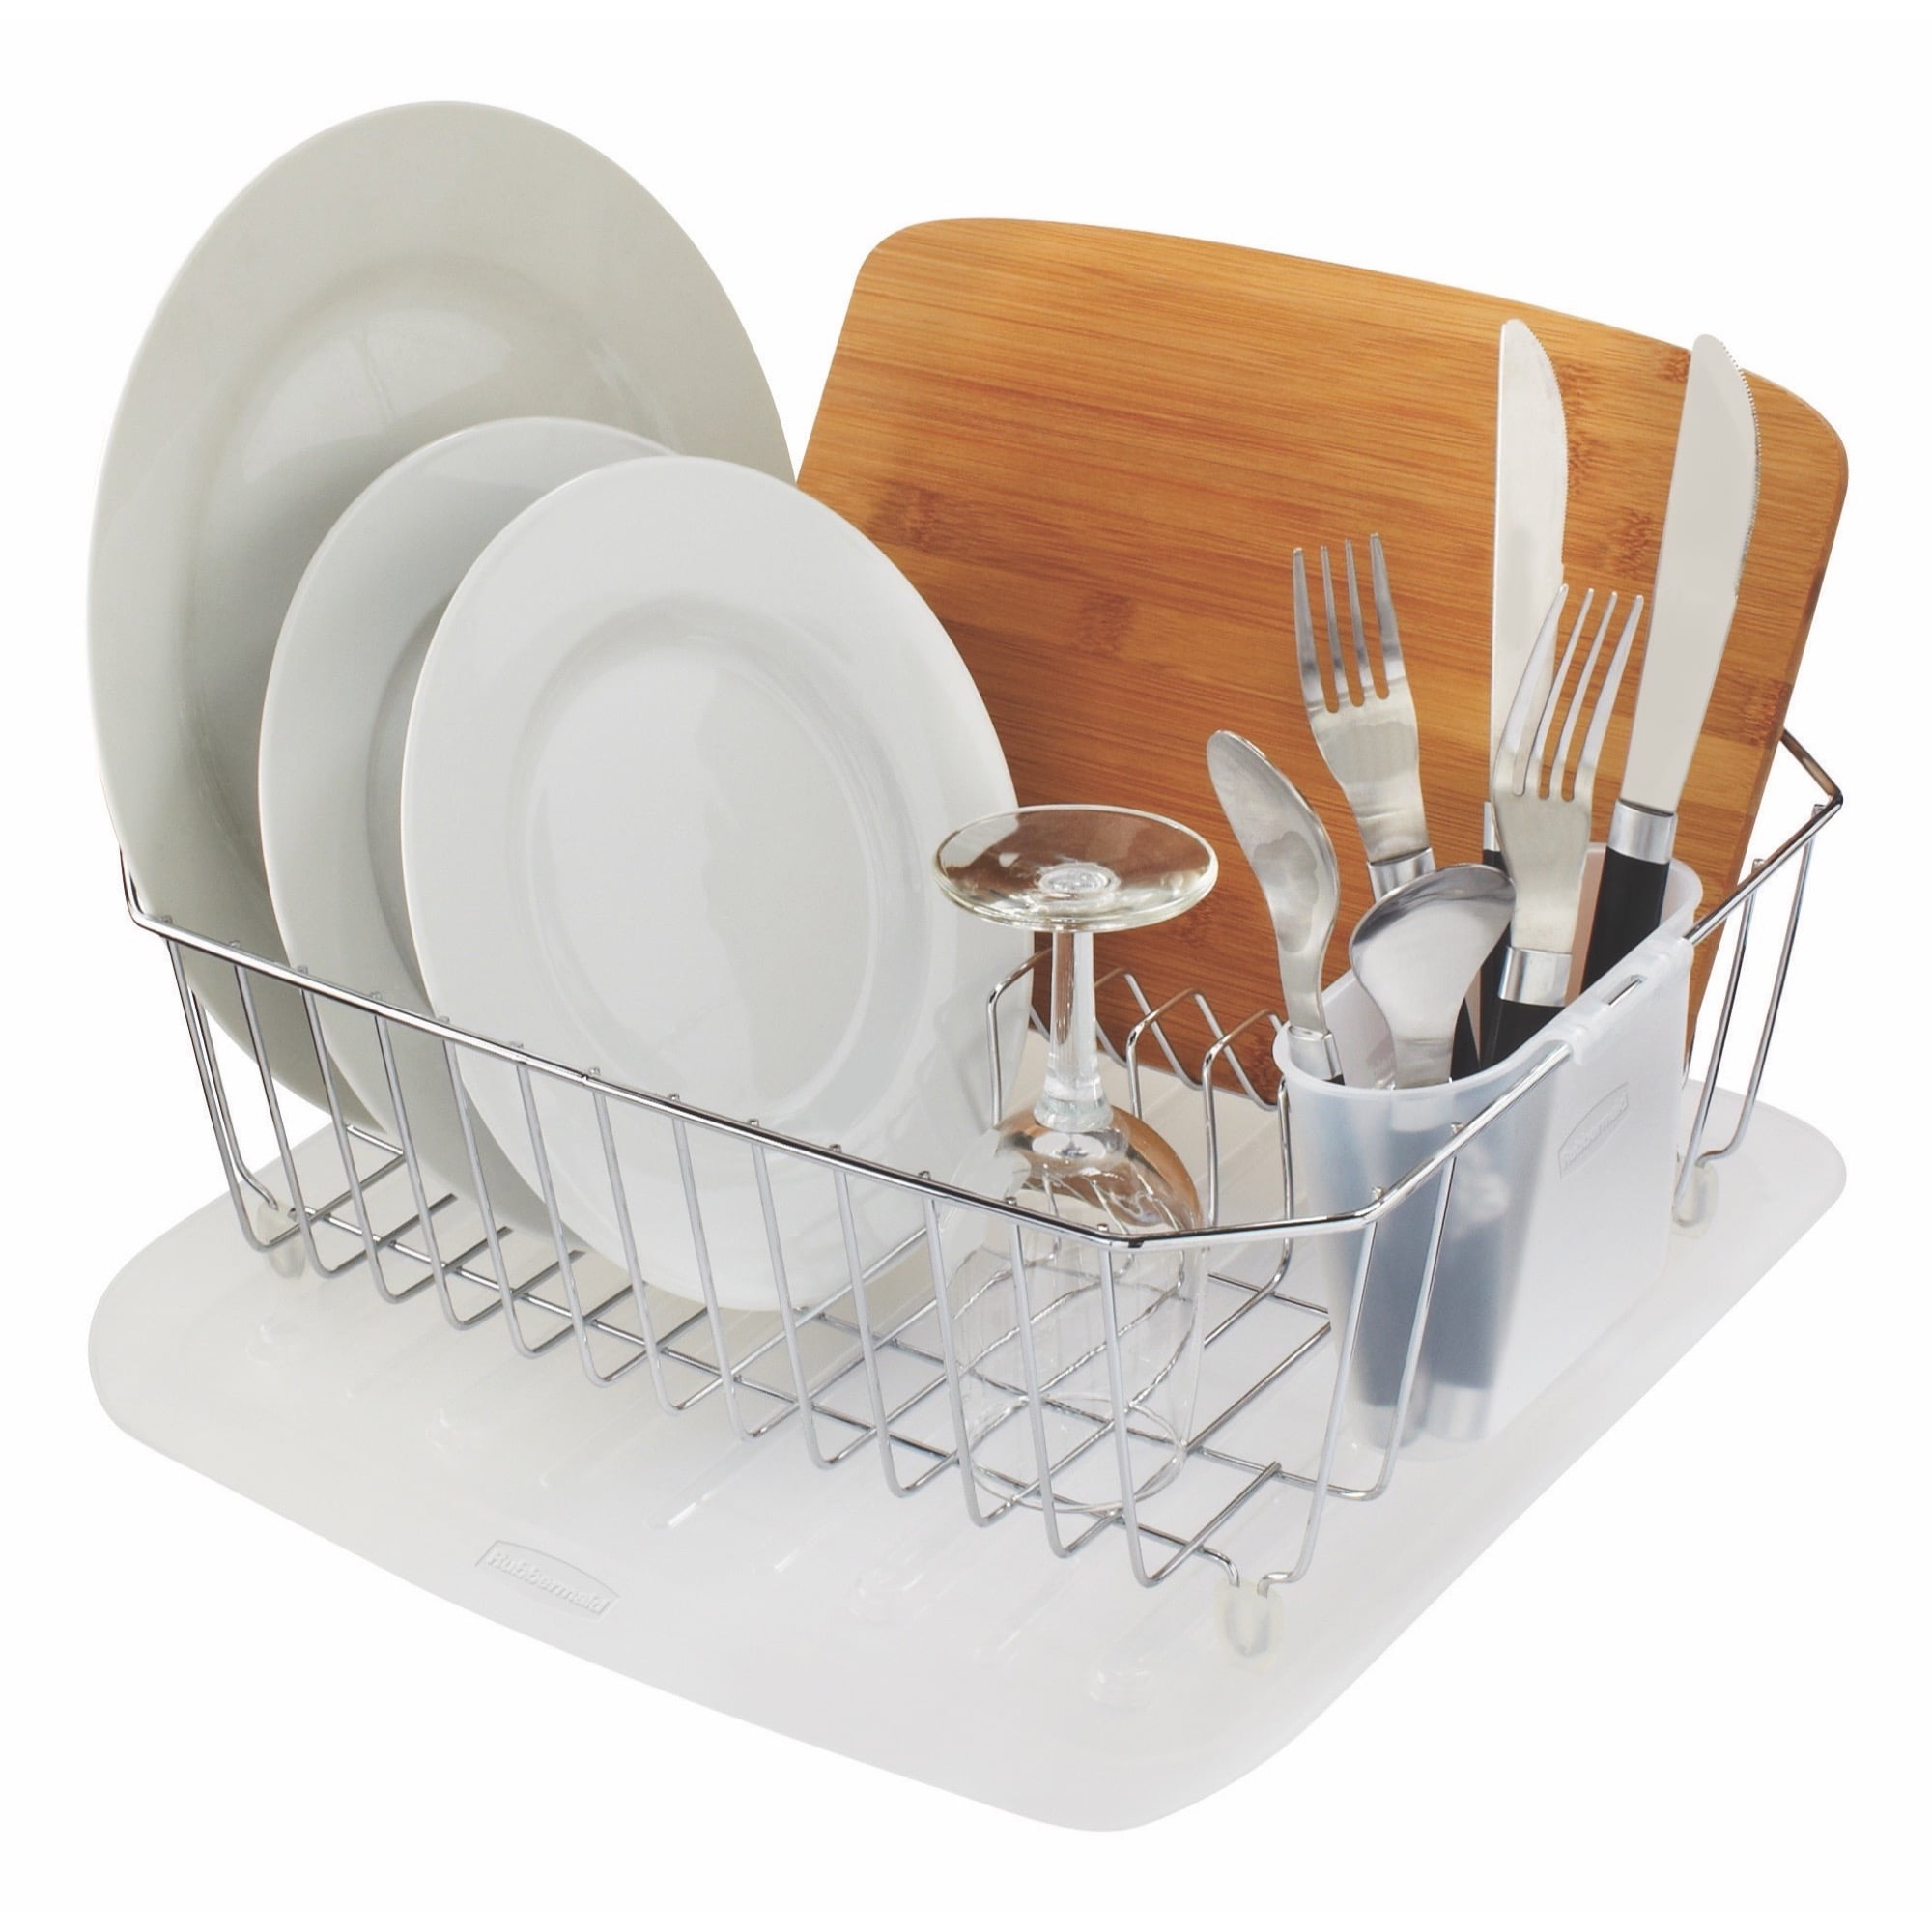 Rubbermaid® Antimicrobial Dish Drying Rack with Drainboard